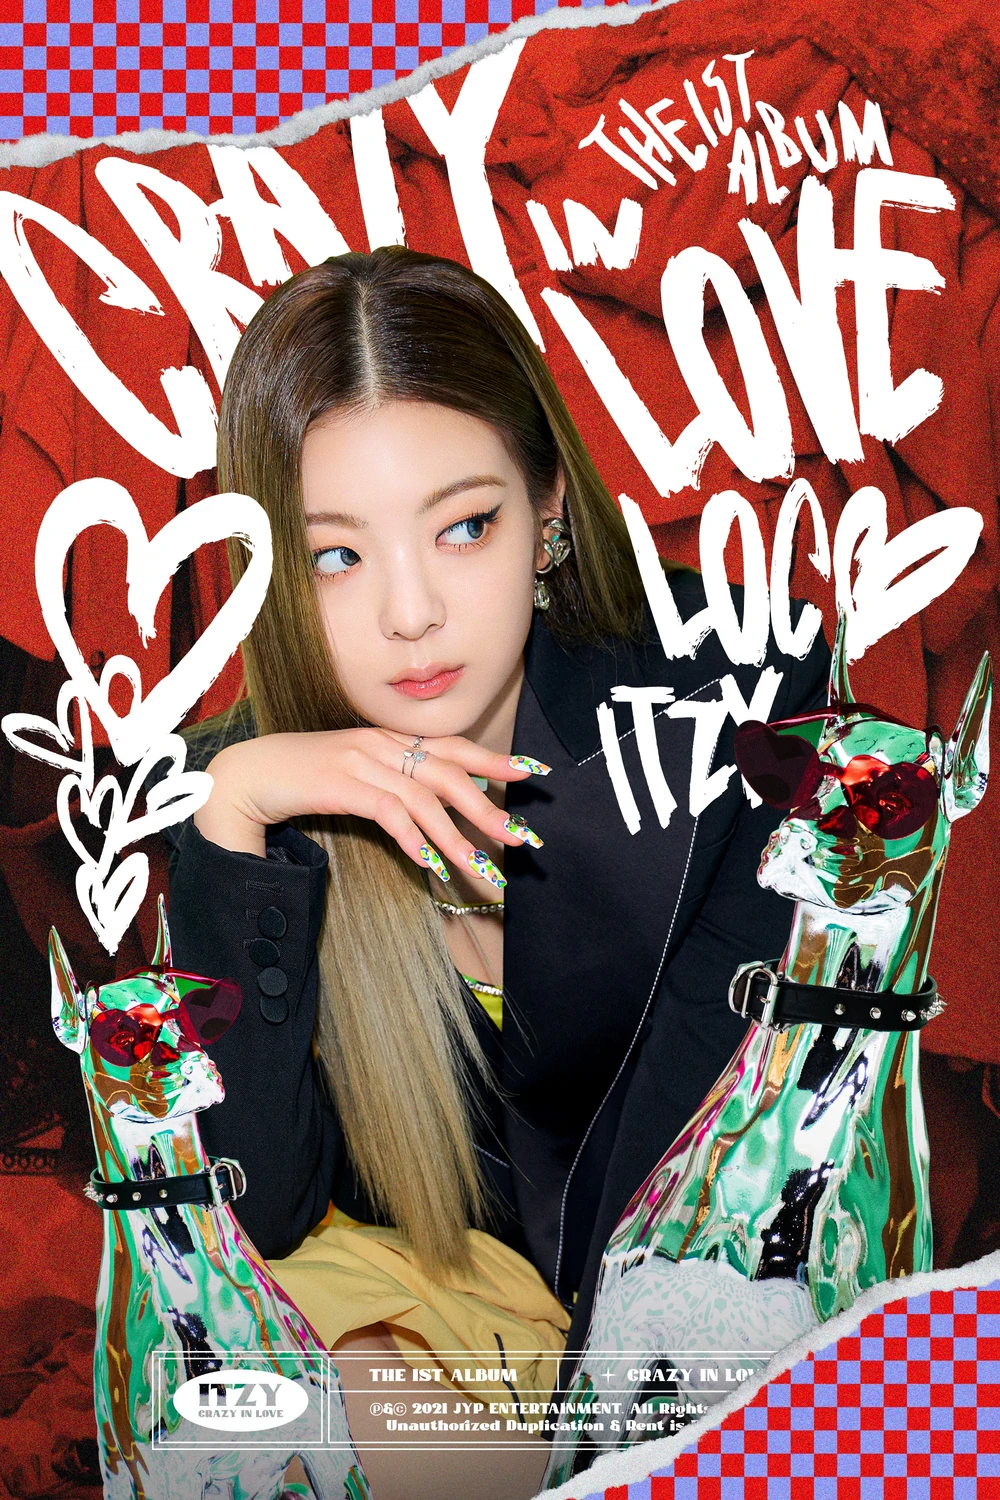 Itzy Crazy In Love Lia Concept Teaser Picture Image Photo Kpop K-Concept 1